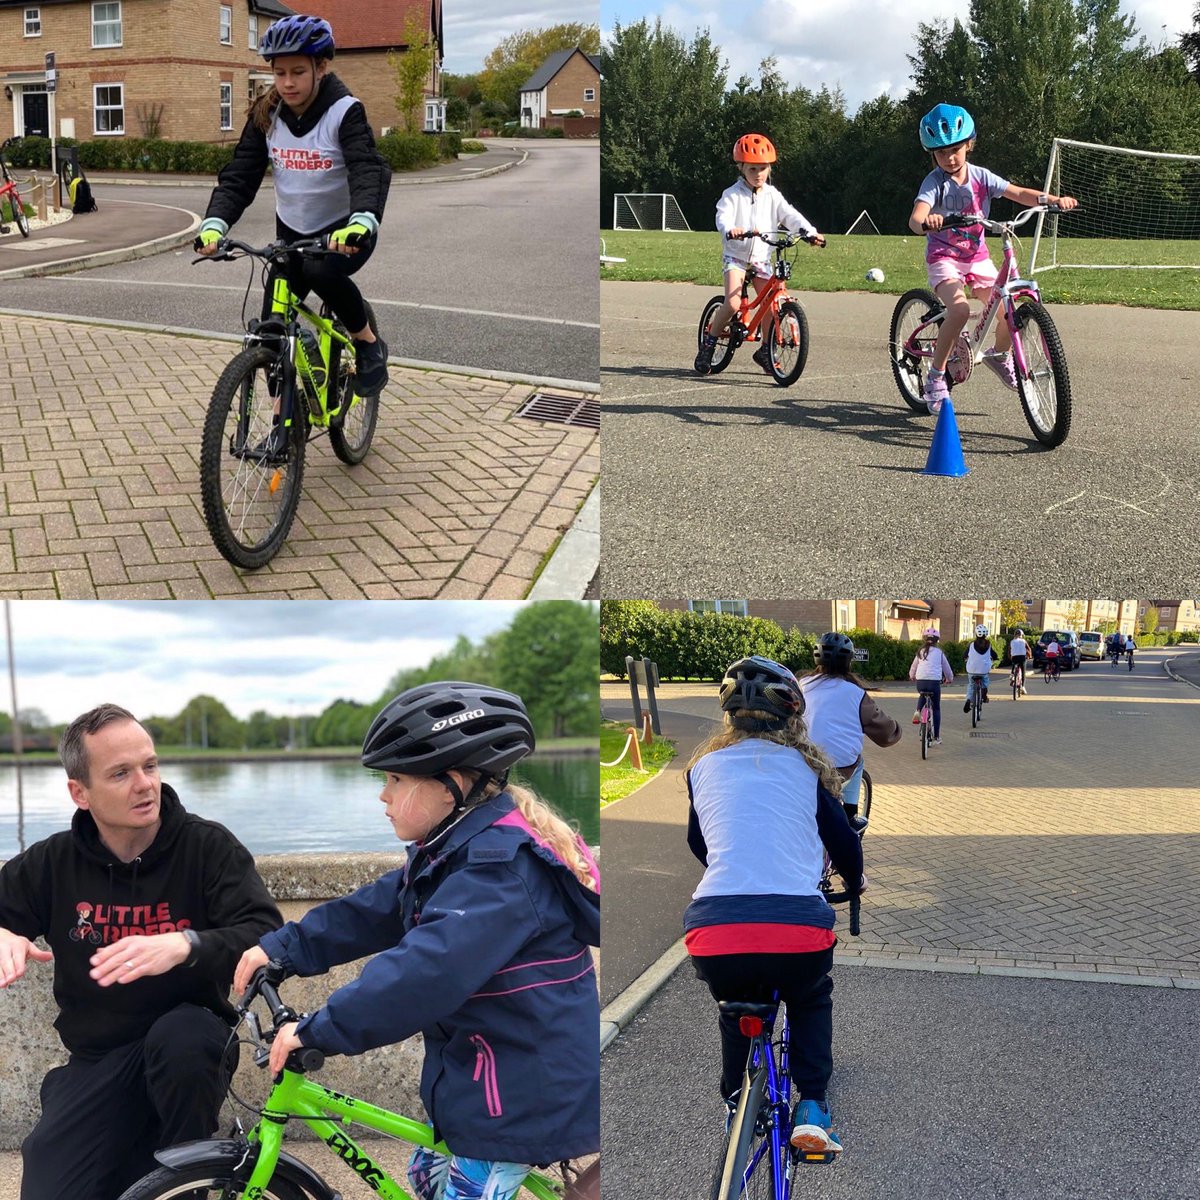 EASTER CYCLING COURSES 🐣 During the Easter holidays we are running a variety of courses. 🚴‍♂️ Learn to Ride Course (4yrs+) littleridersuk.co.uk/learntoride 🚴‍♂️ Bikeability Course (9 yrs+)littleridersuk.co.uk/bikeability